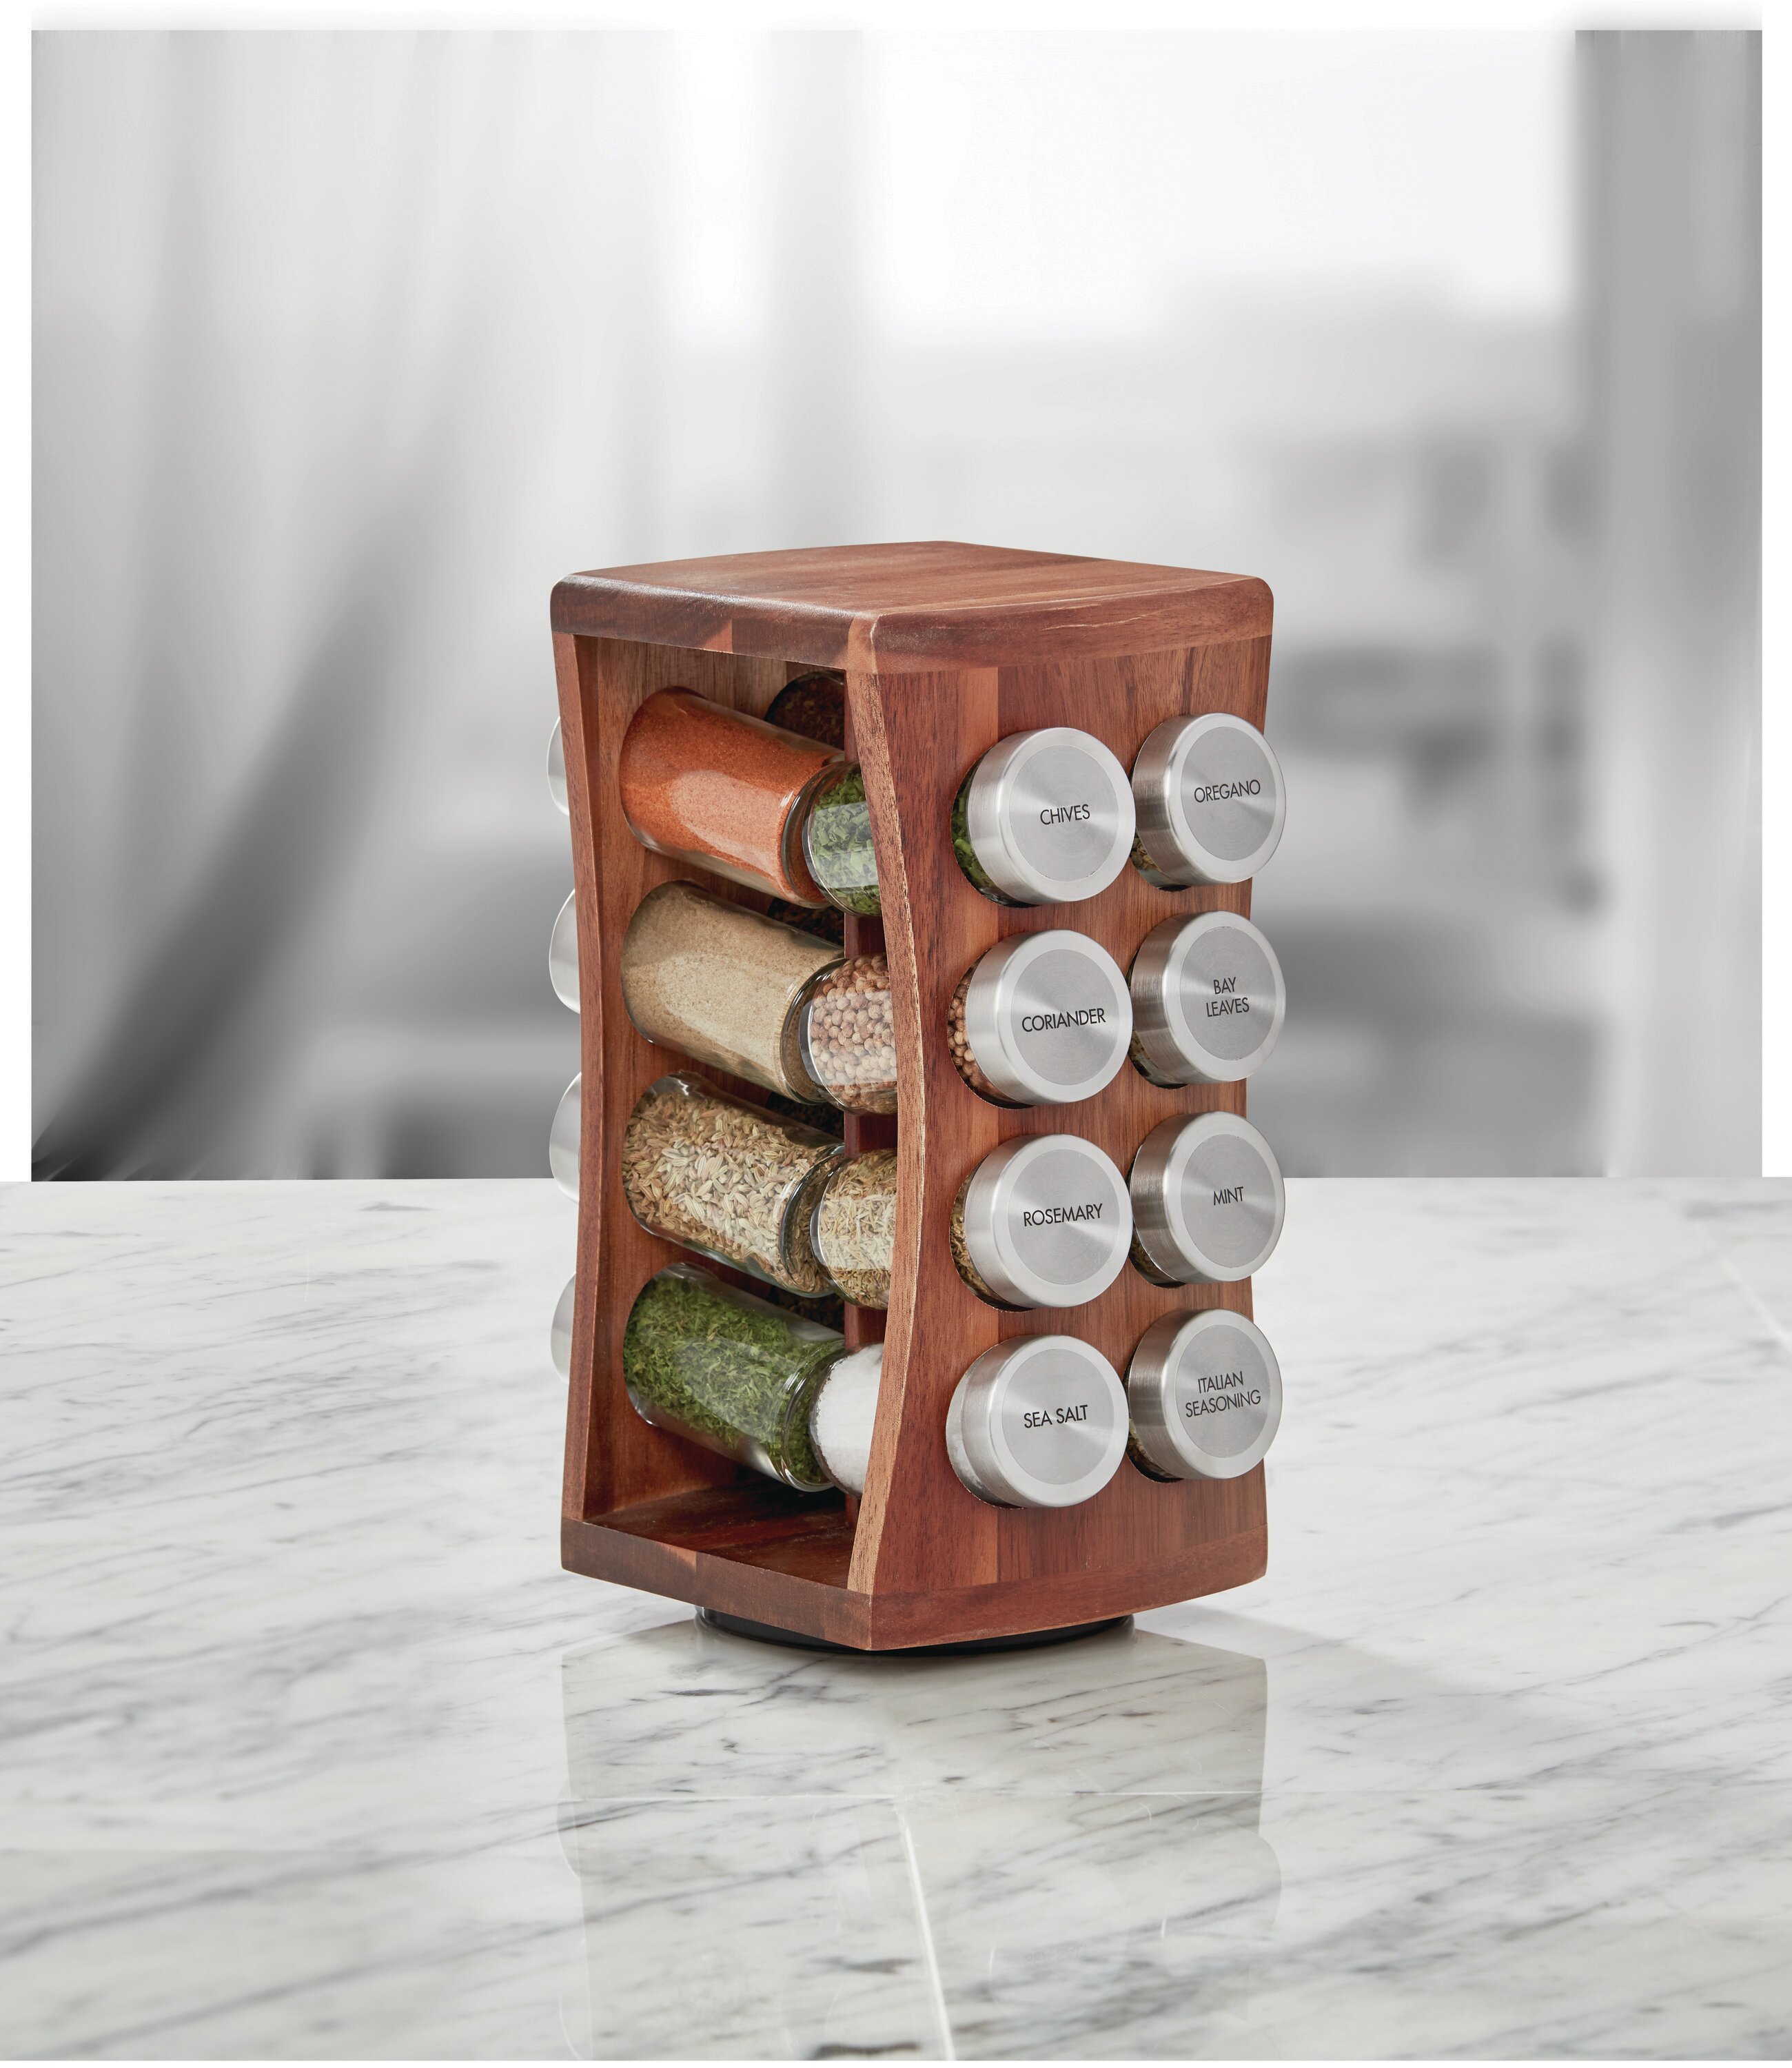 Kamenstein 20 Jar Vintage Revolving Countertop Spice Rack Organizer with Spices  Included